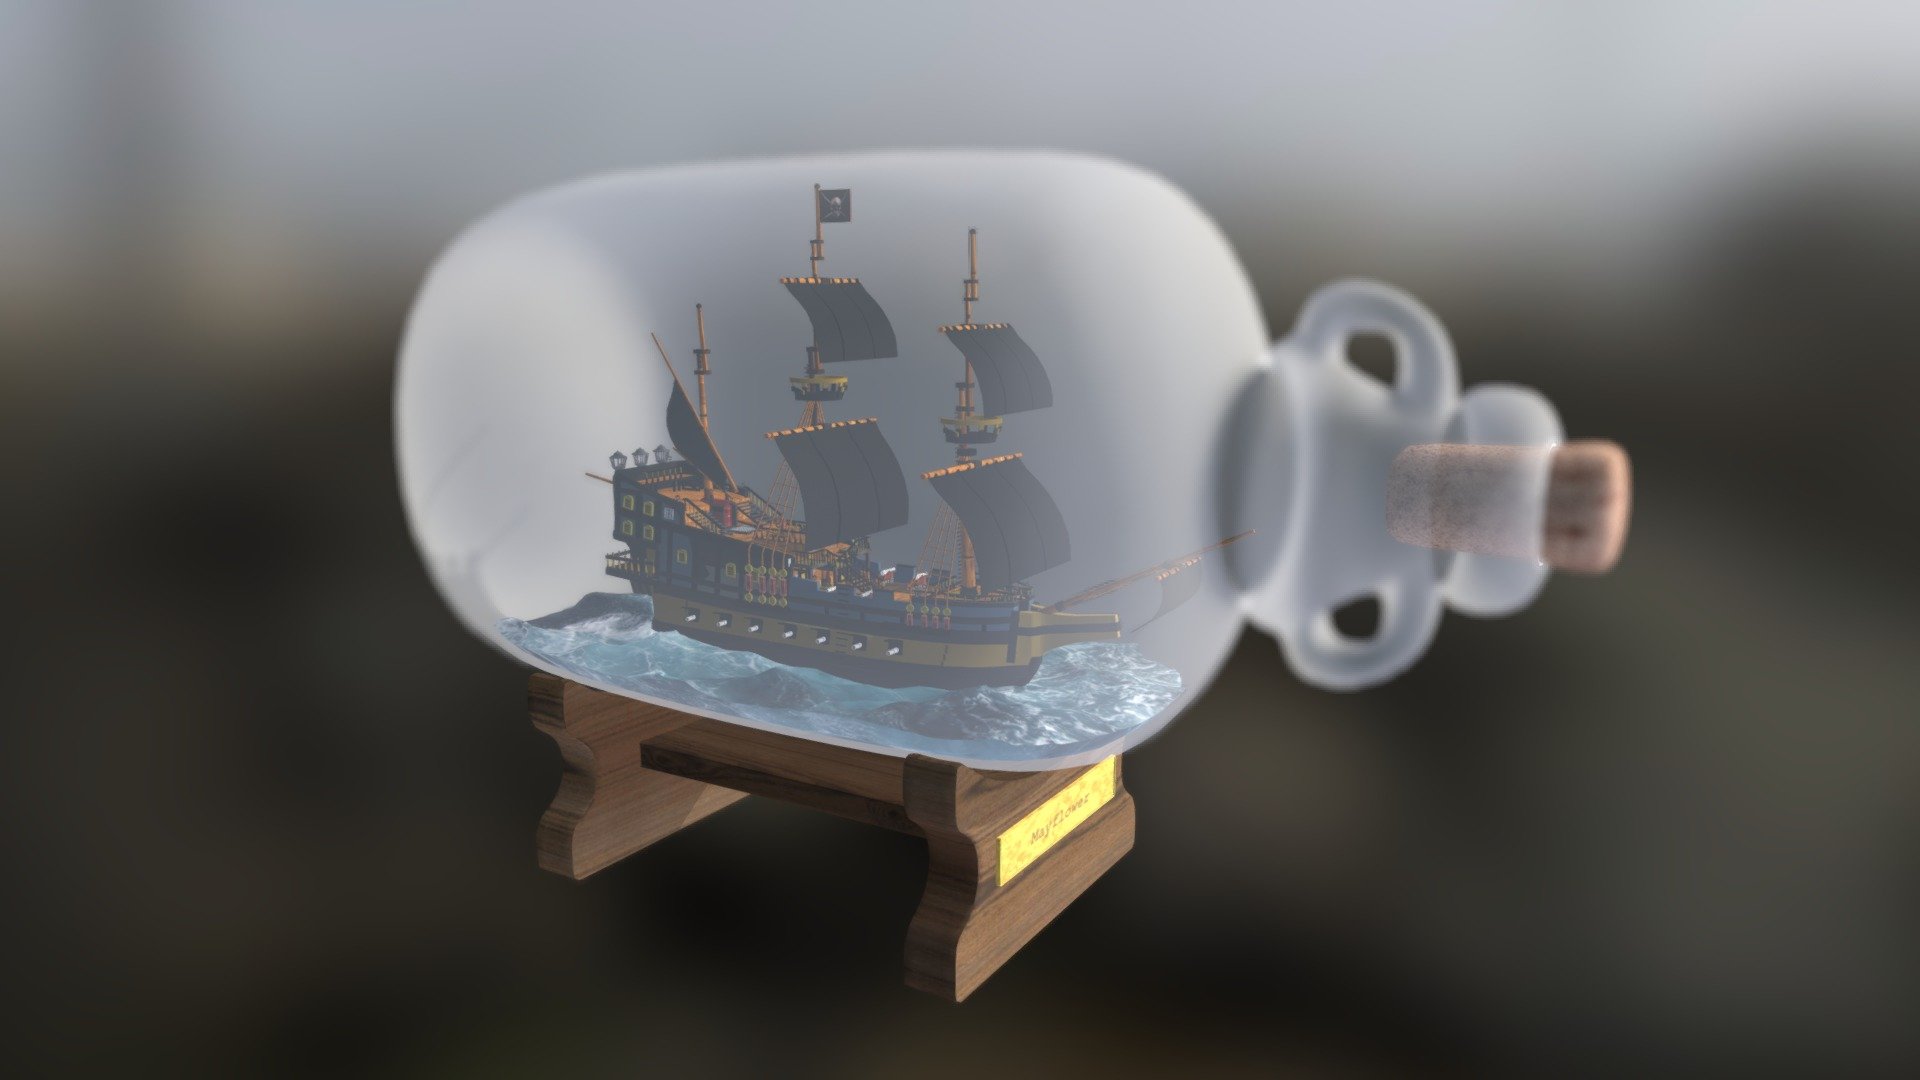 Pirate Ship In Bottle